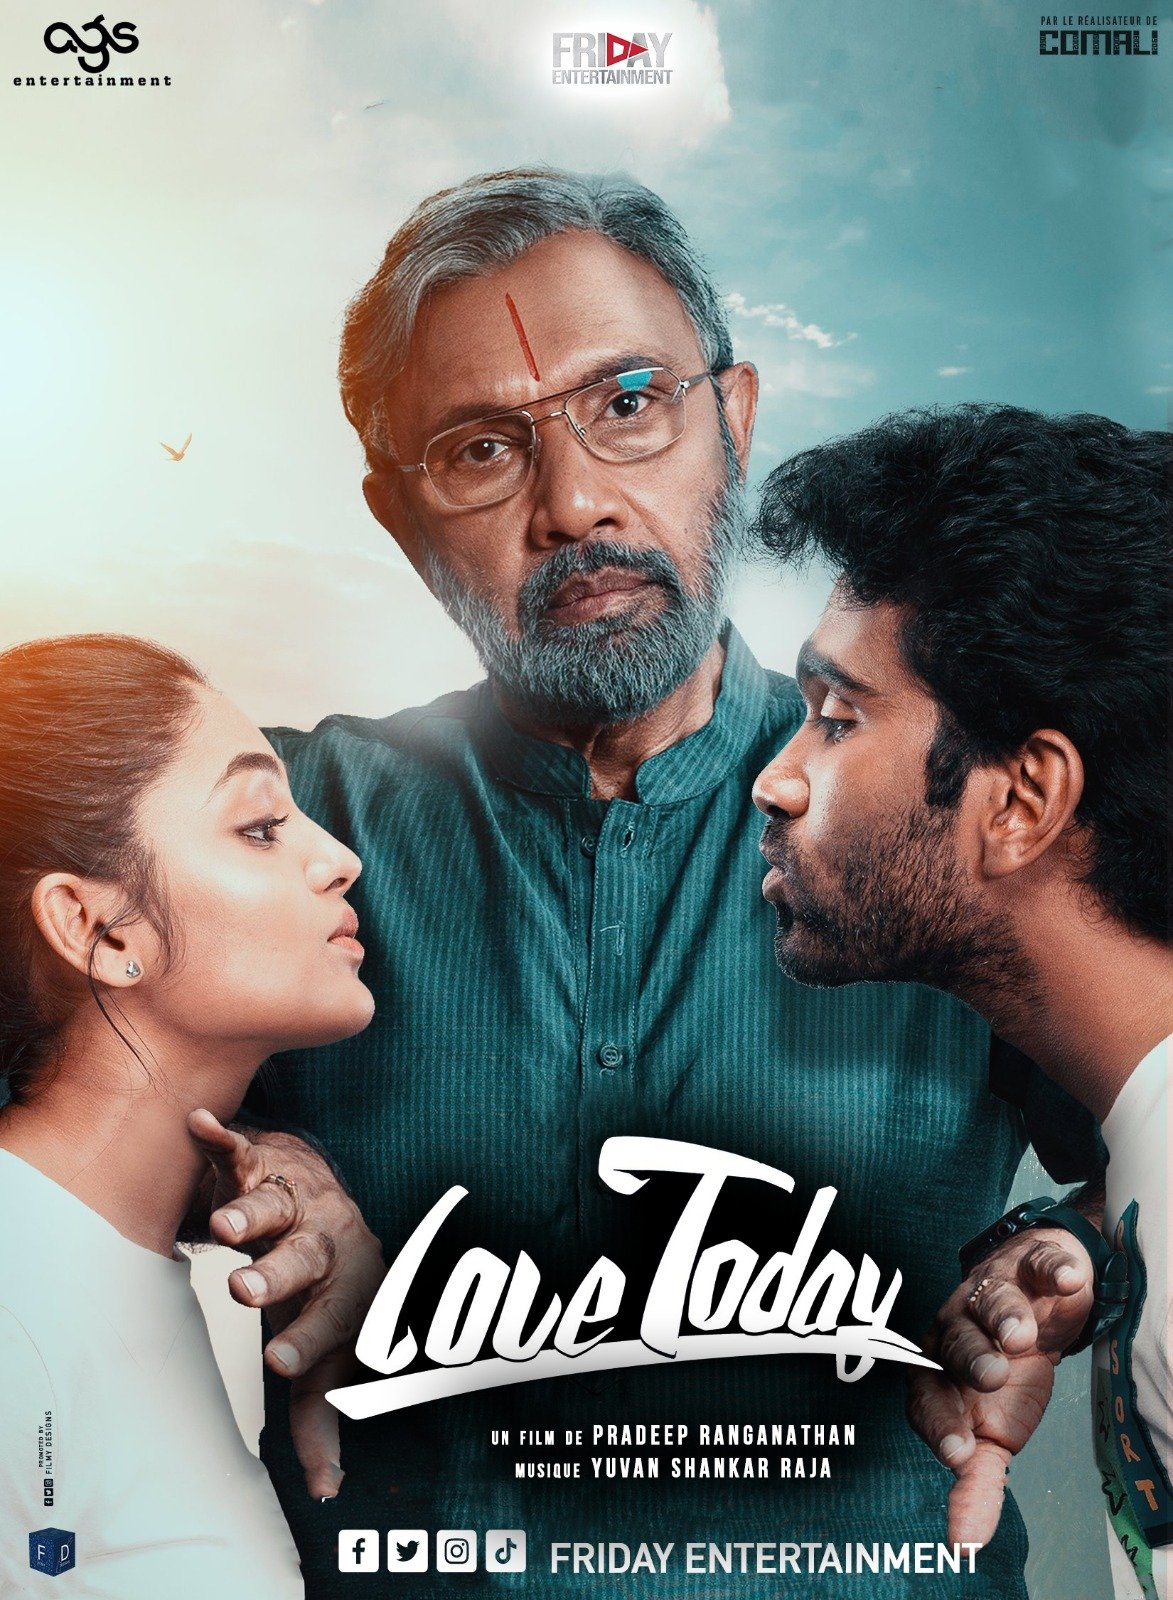 love today movie review behindwoods review